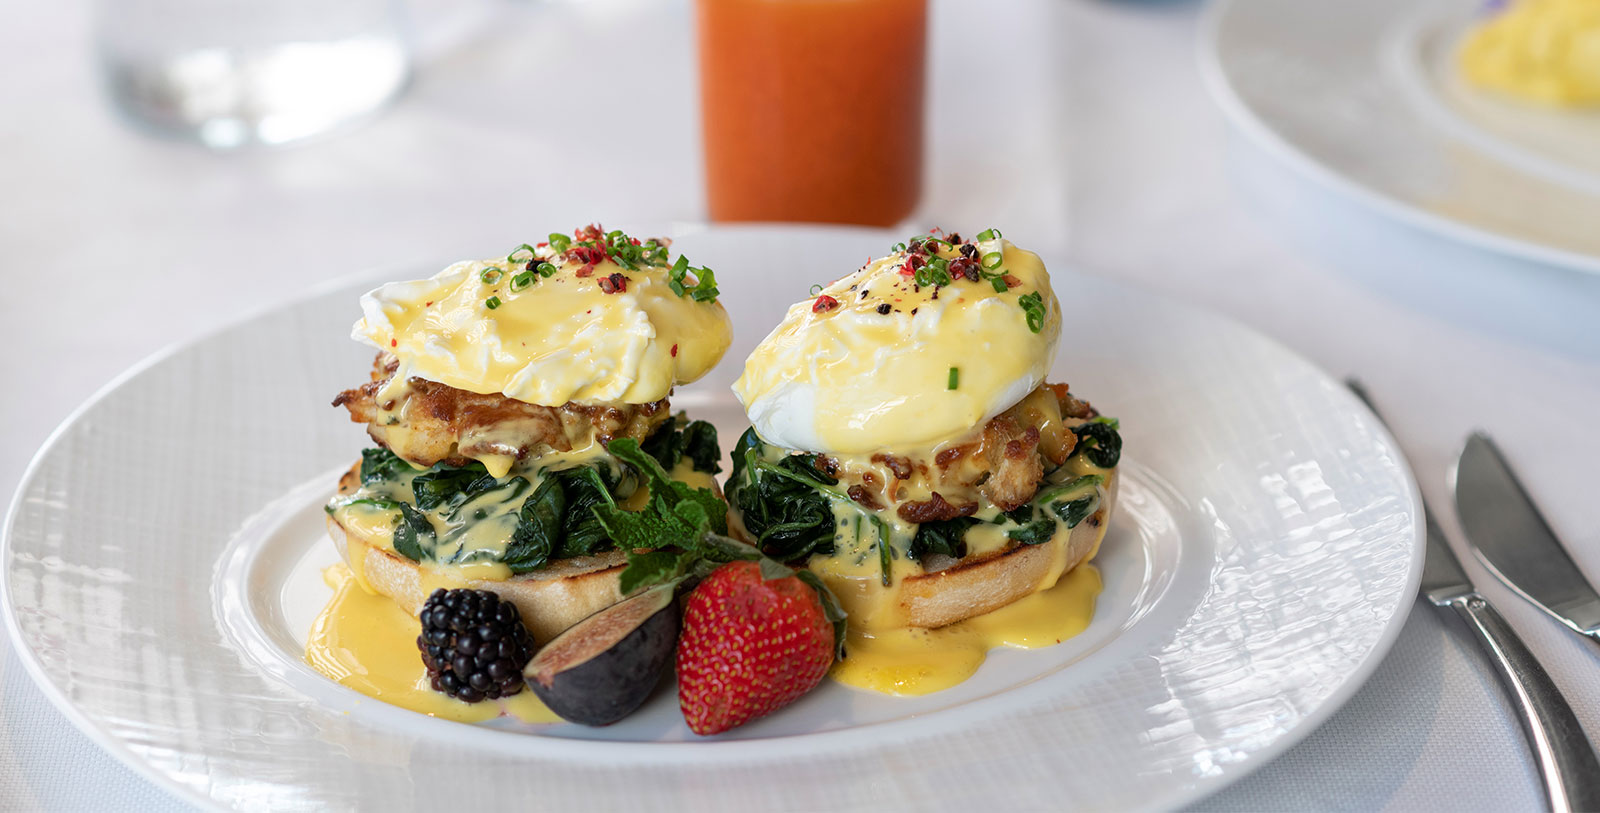 Image of Maryland Crab Cakes Egg Benedict, Inn at Perry Cabin in St. Michaels, Maryland, 1816, Member of Historic Hotels of America, Taste